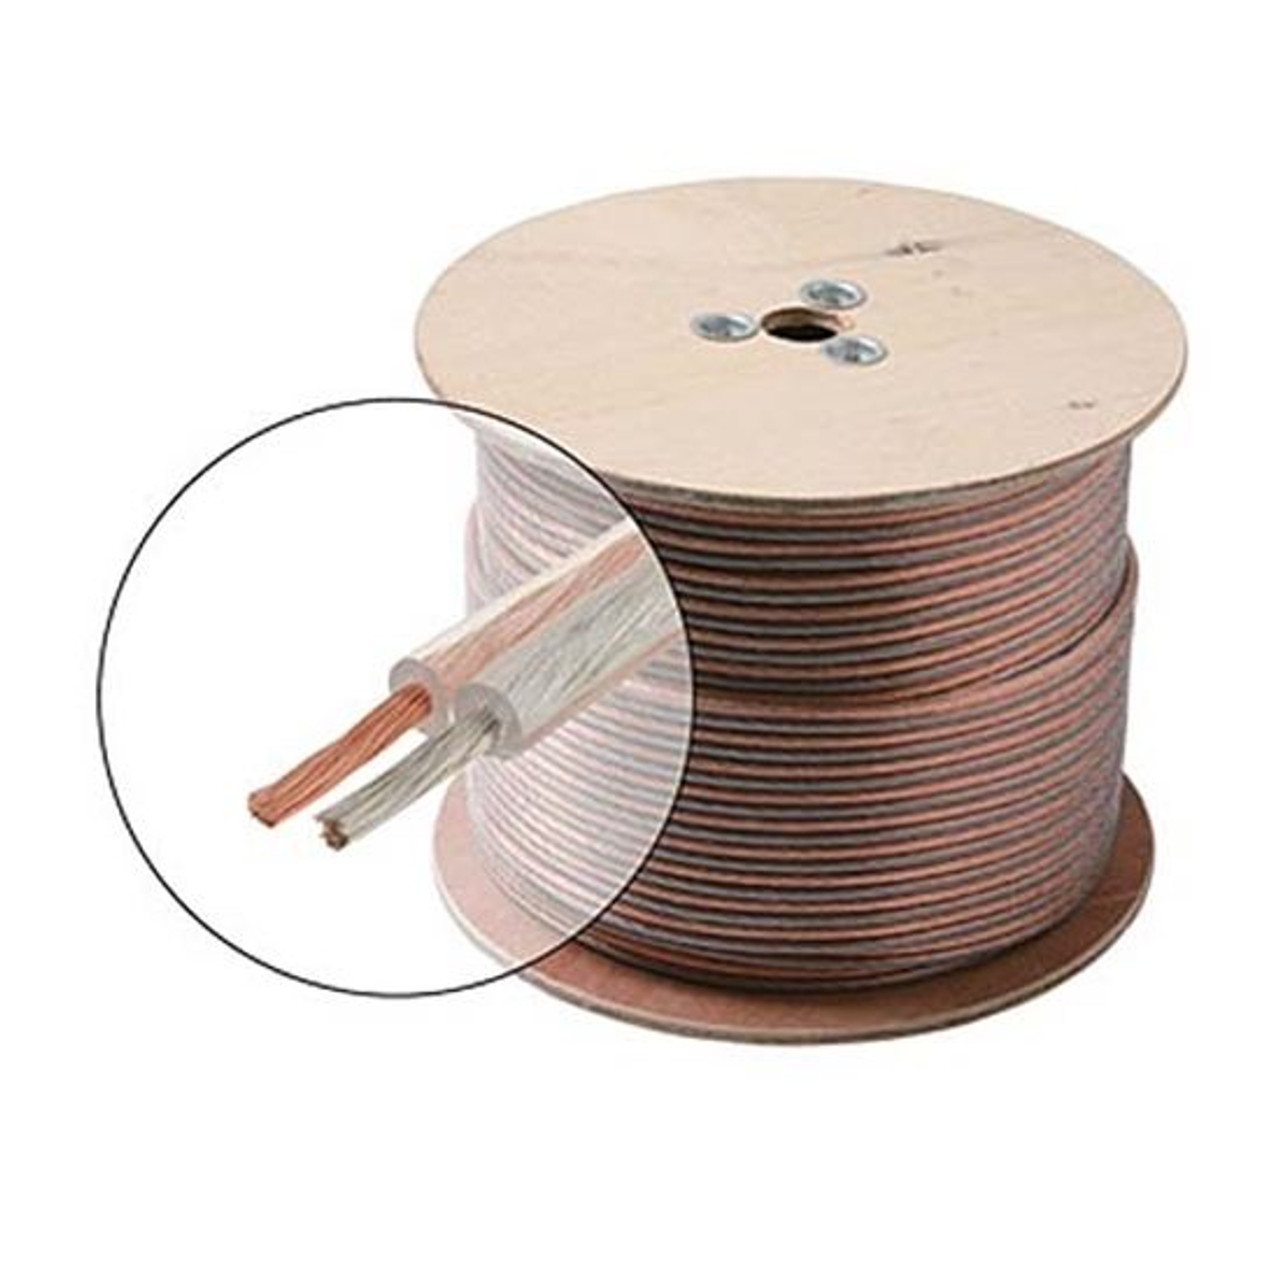 Eagle 100' FT 10 AWG GA Speaker Cable Python Ultra Flex 2 Conductor Wire Monster Type Oxygen Free Copper PVC Jacket Copper Speaker Cable HI-FI Digital Audio Home Theater